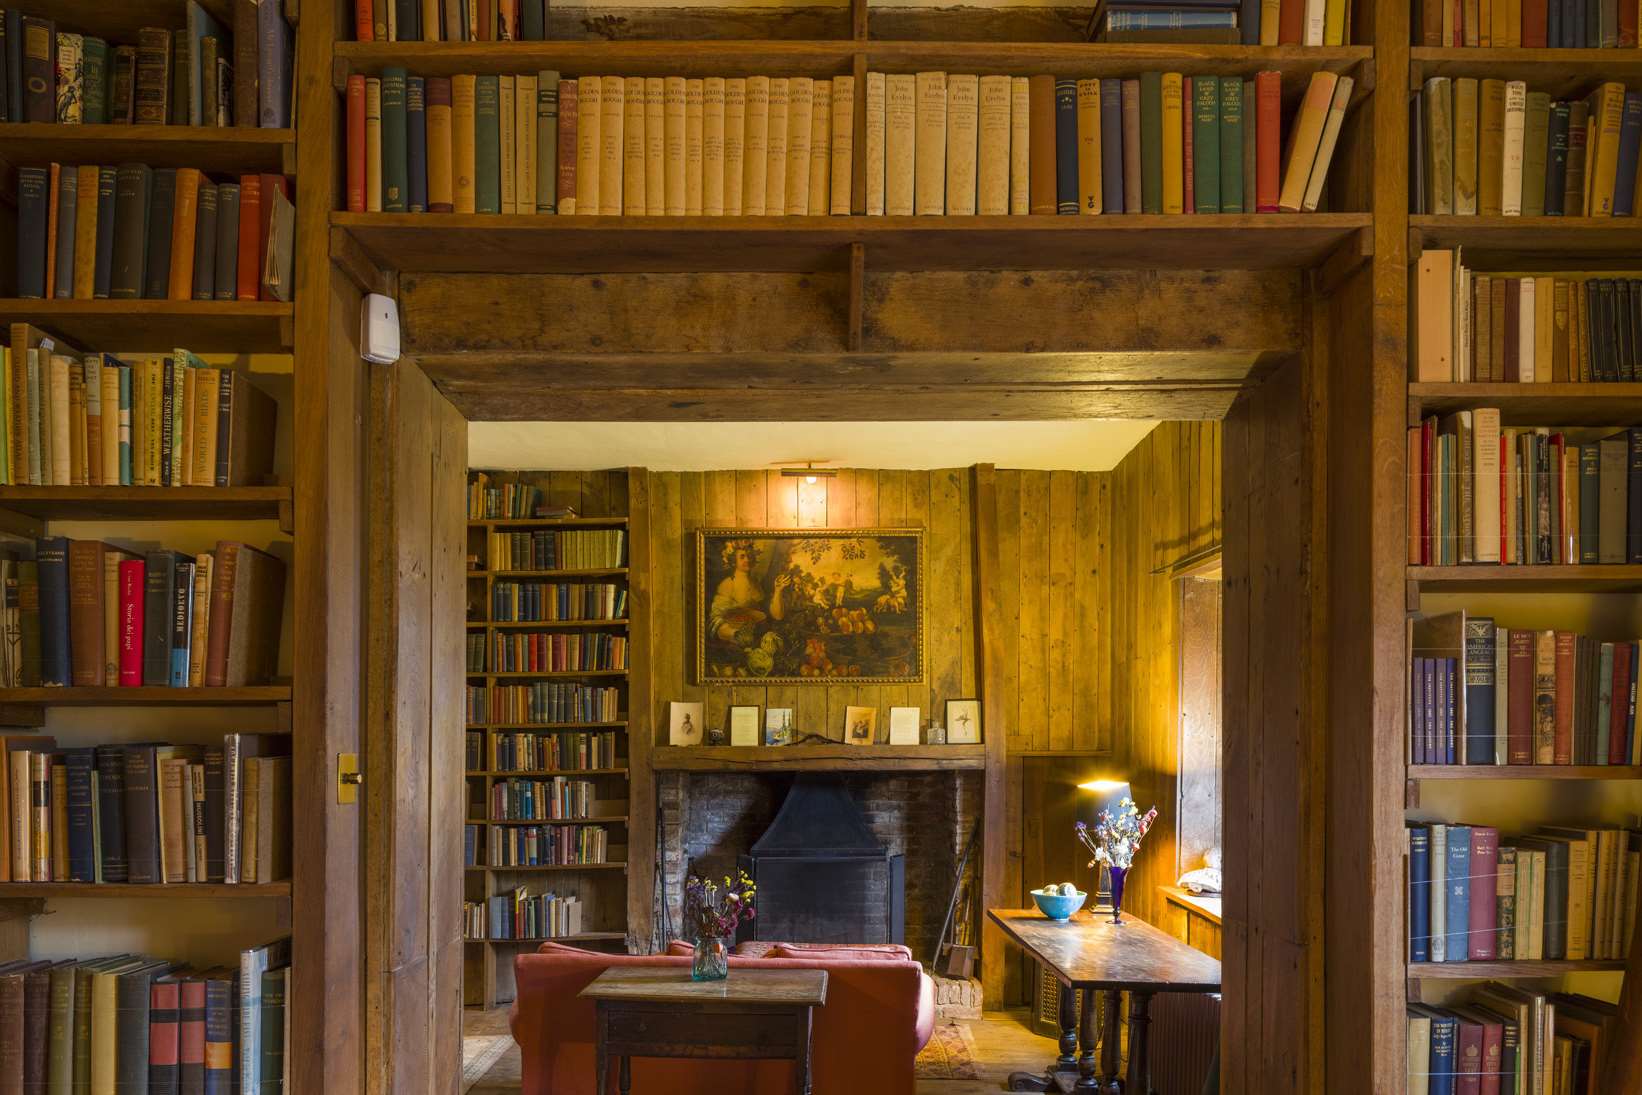 A glimpse of the sitting room in the South Cottage at Sissinghurst castle Picture: National trust/James Dobson